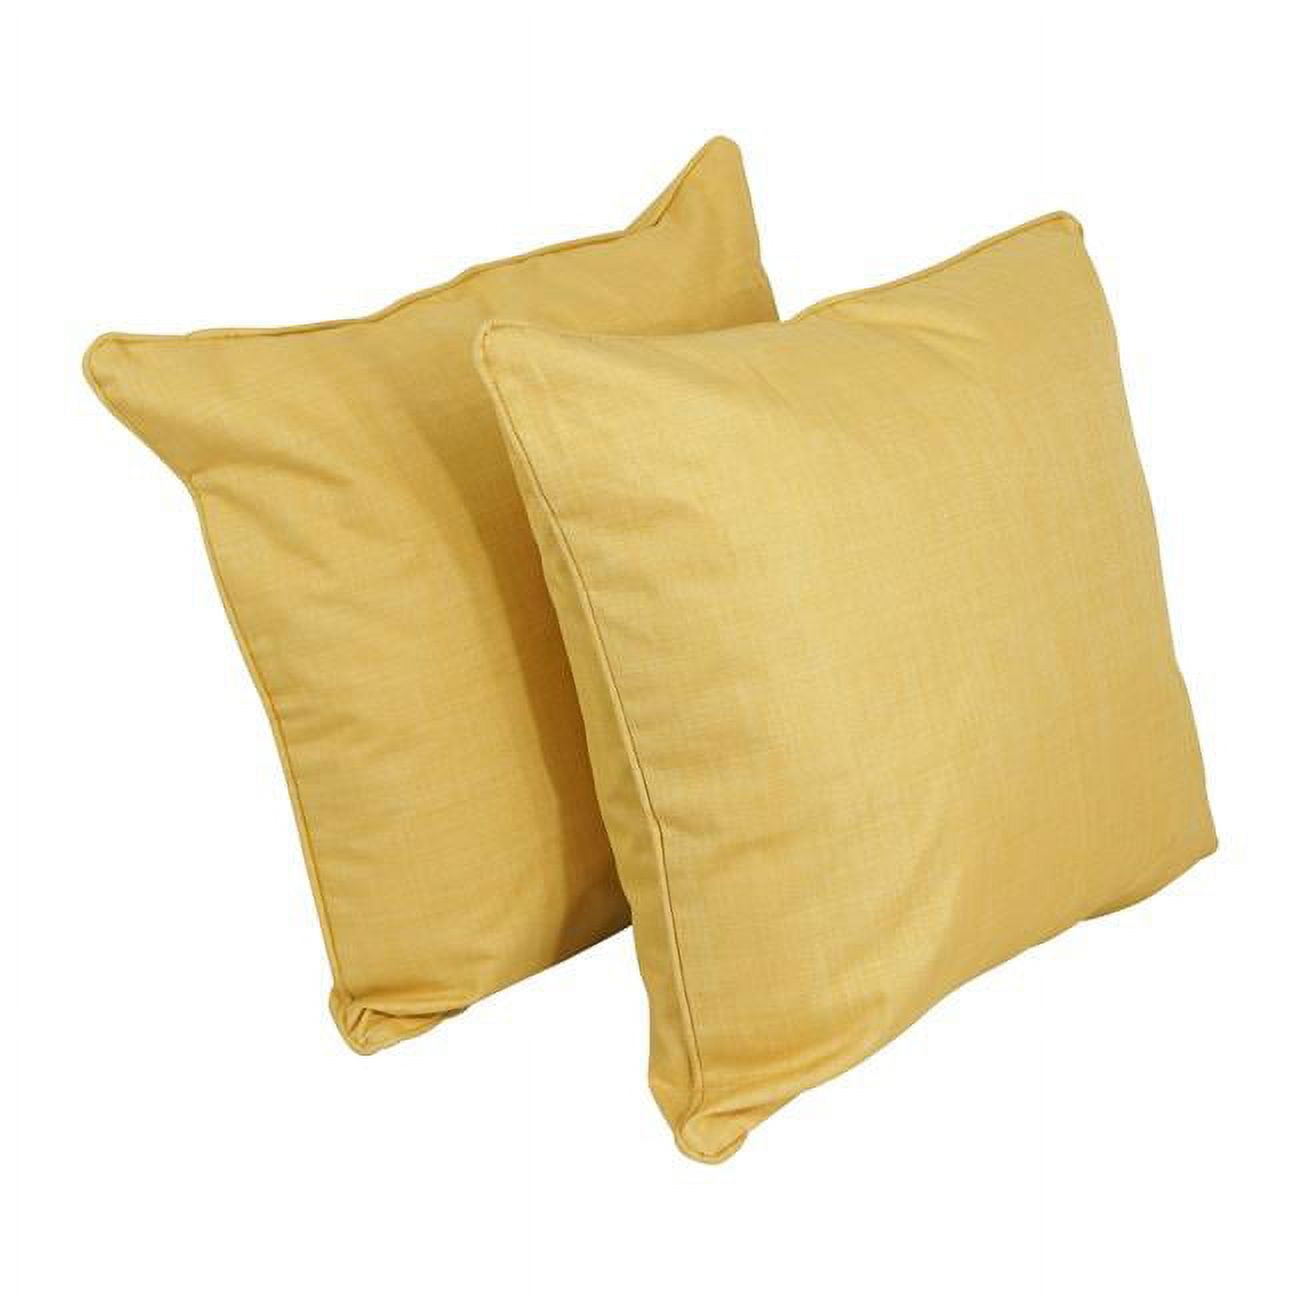 Picture of Blazing Needles 9813-CD-S2-REO-SOL-03 25 in. Double-Corded Spun Polyester Square Floor Pillows with Inserts, Lemon - Set of 2